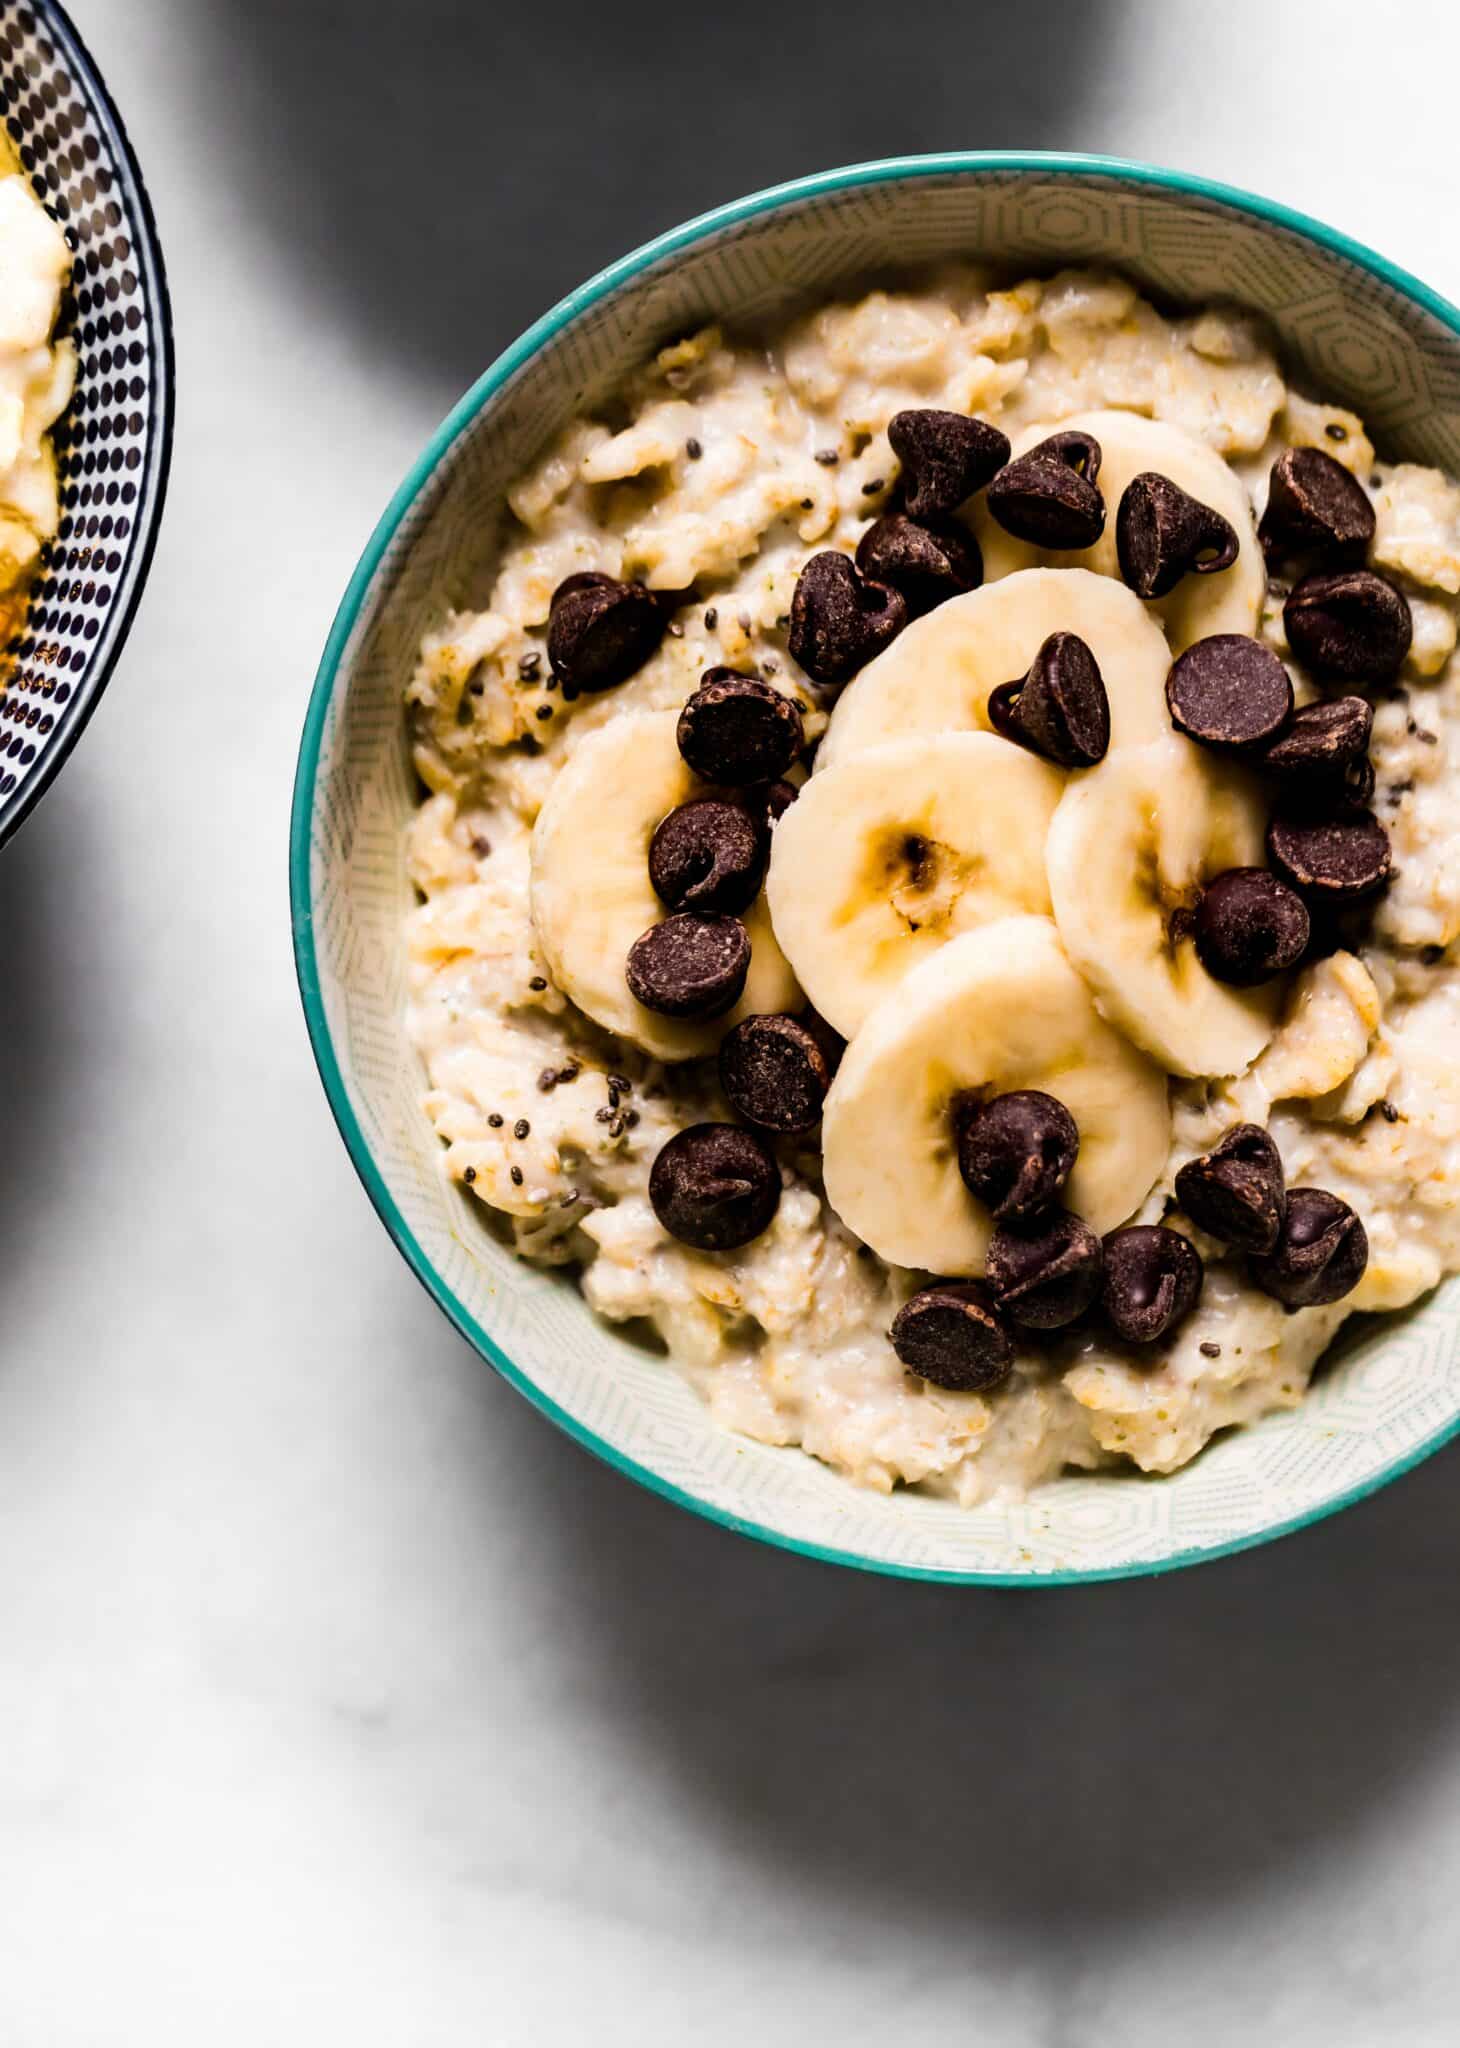 Up close photo of high protein oatmeal topped with banana slices and chocolate chips.